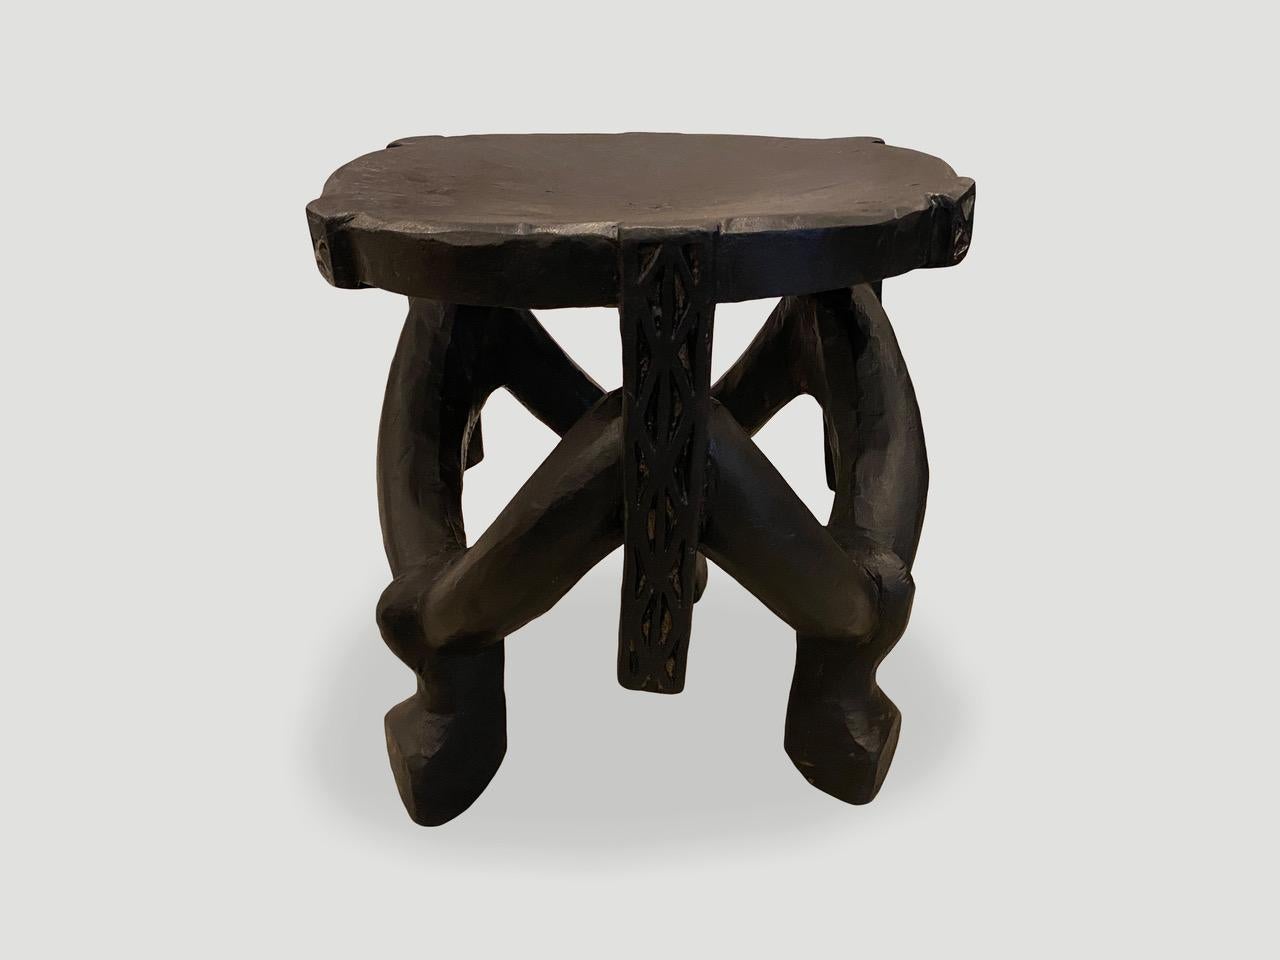 Impressive antique African mahogany side table or stool, hand carved from a single block of mahogany wood. Great for placing a book or perhaps towels in a bathroom, magazines etc. A beautiful, versatile item that is both sculptural and usable. We